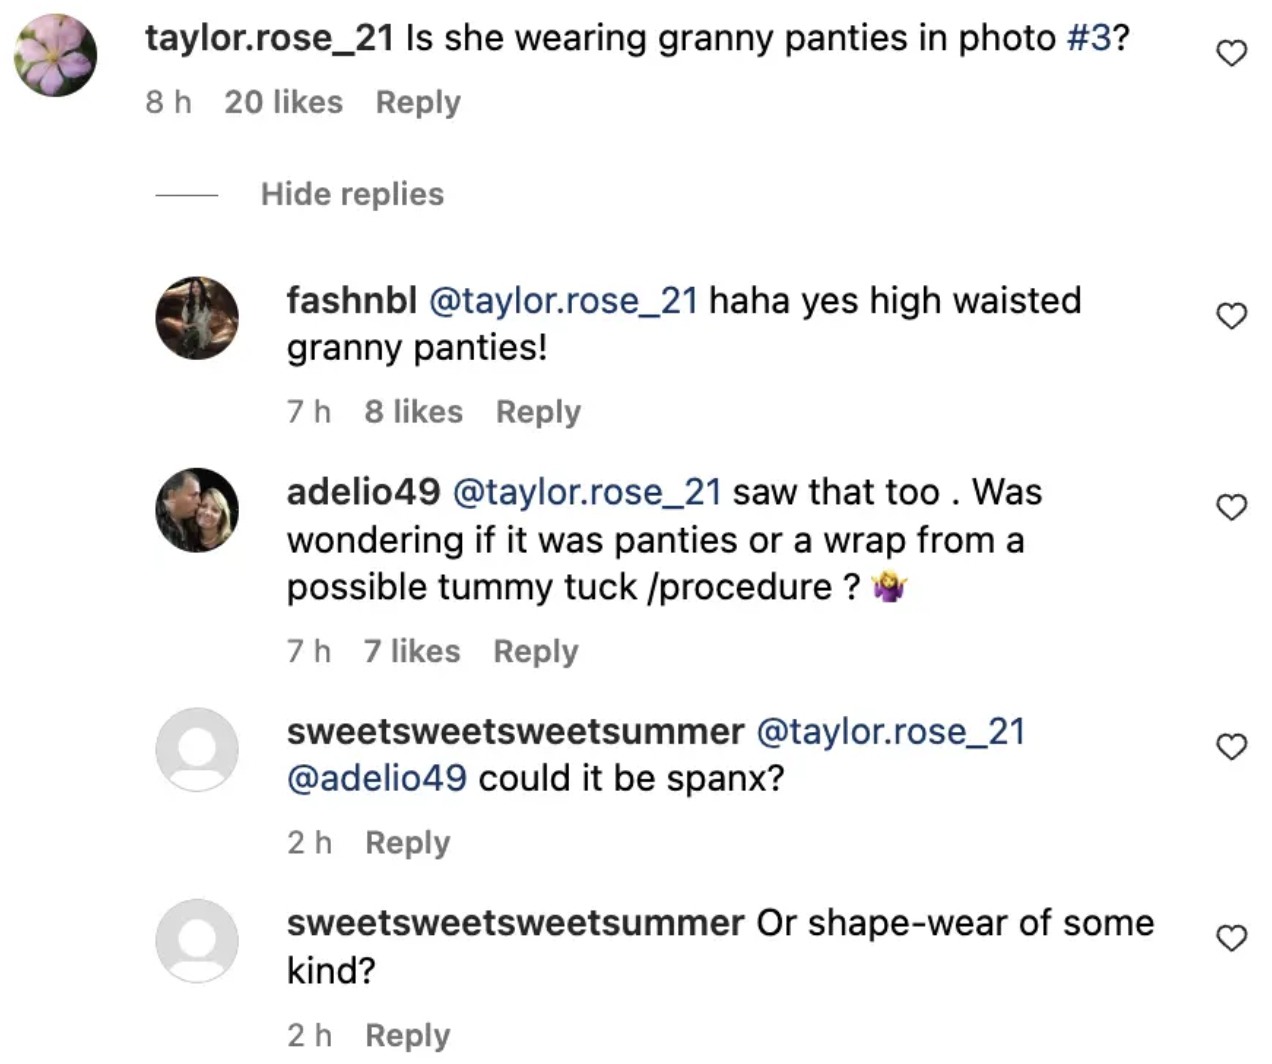 Comments on Blake Lively’s look while out and about in New York City. | Source: Instagram.com/justjared